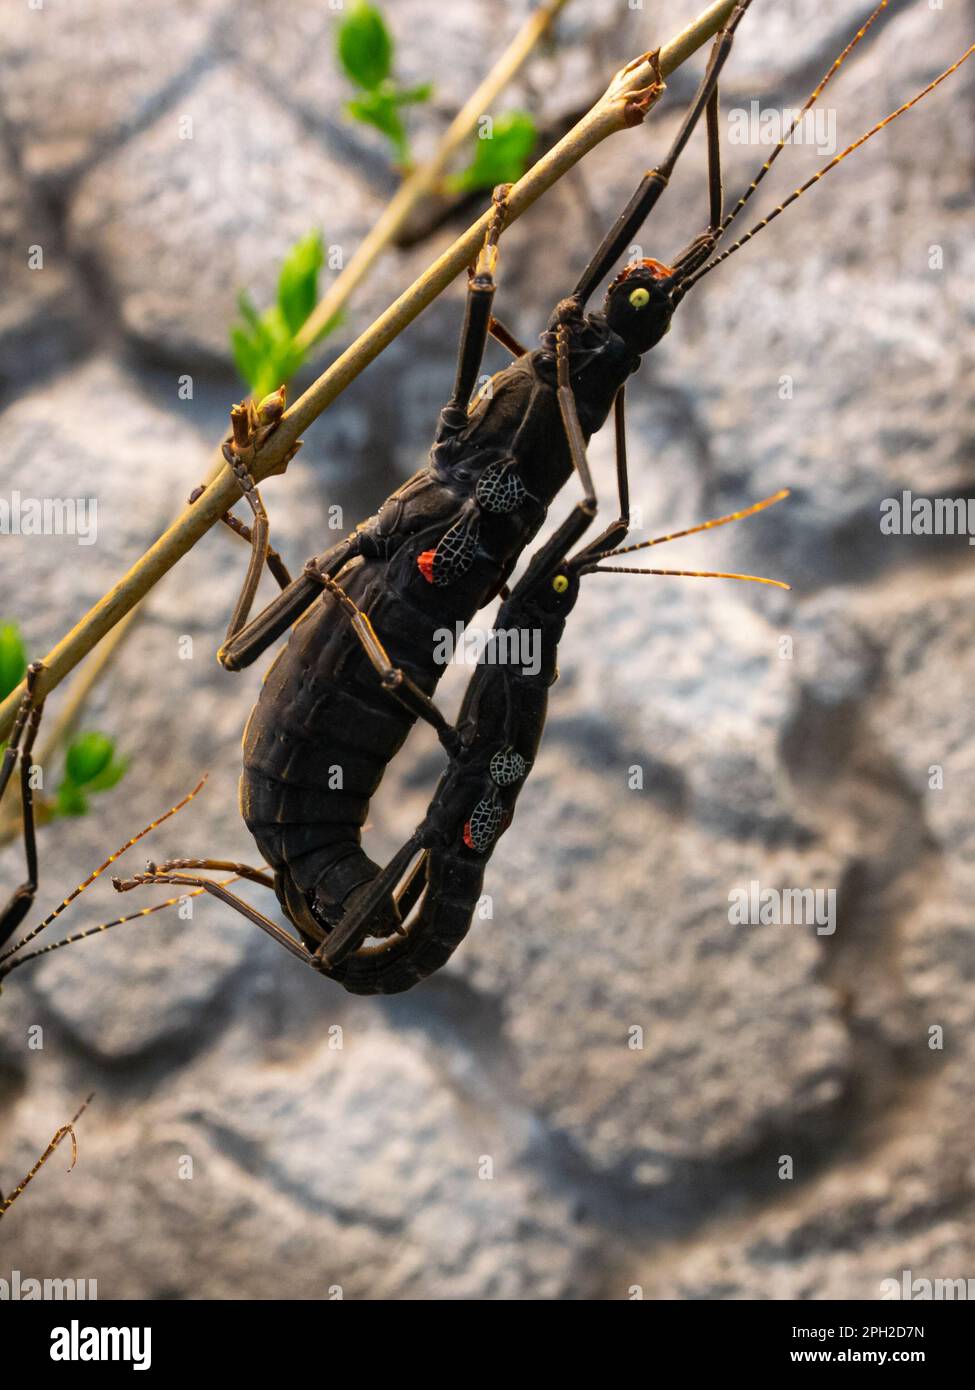 Pair of black beauty stick insects, also known as  Peruphasma schultei are hanging on a branch Stock Photo